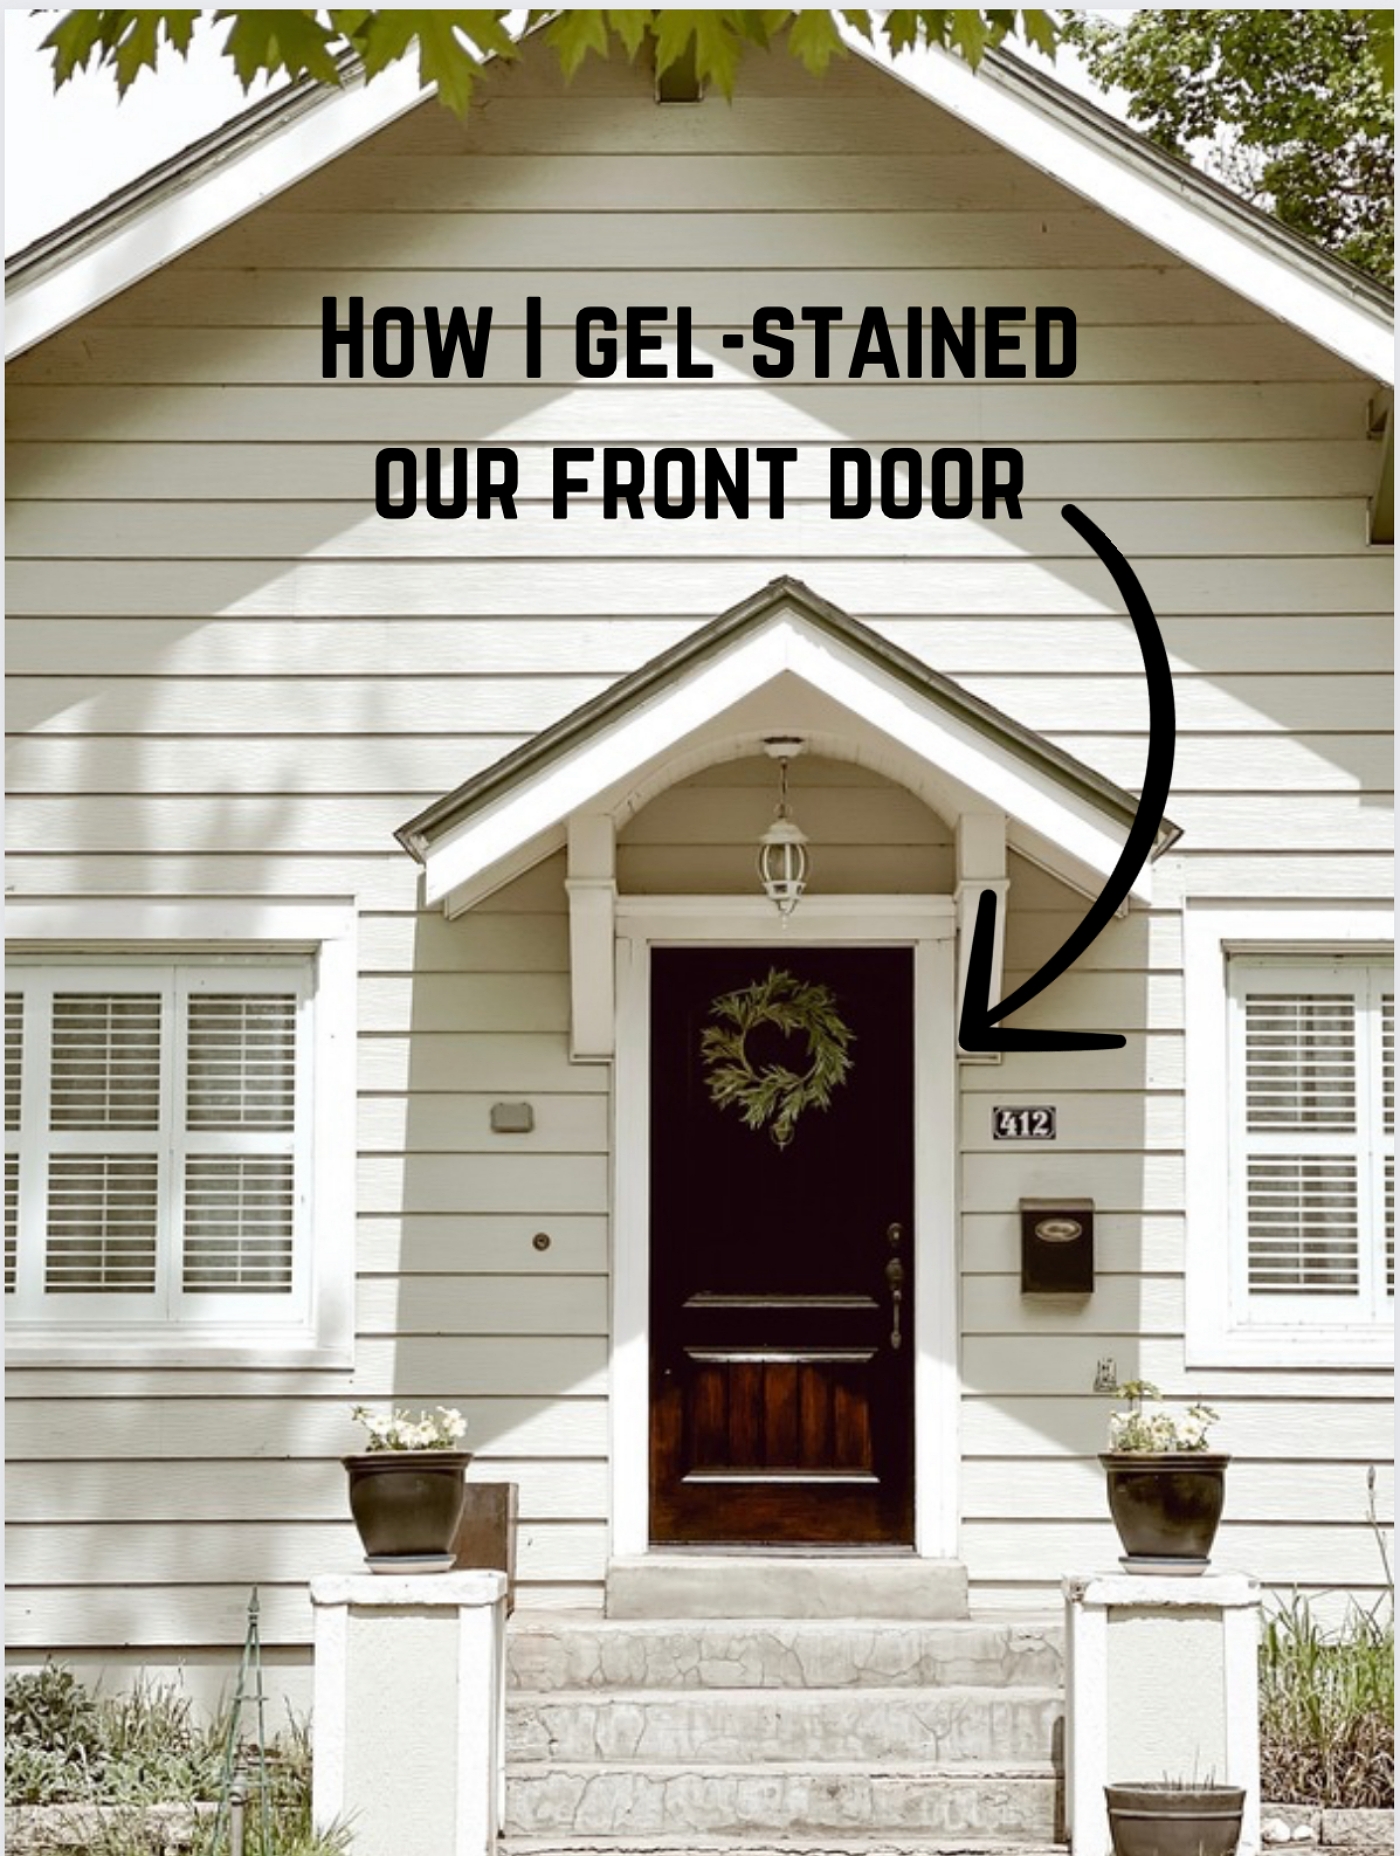 How I Gel-Stained our Front and Back Doors and Updated exterior pictures of our home.